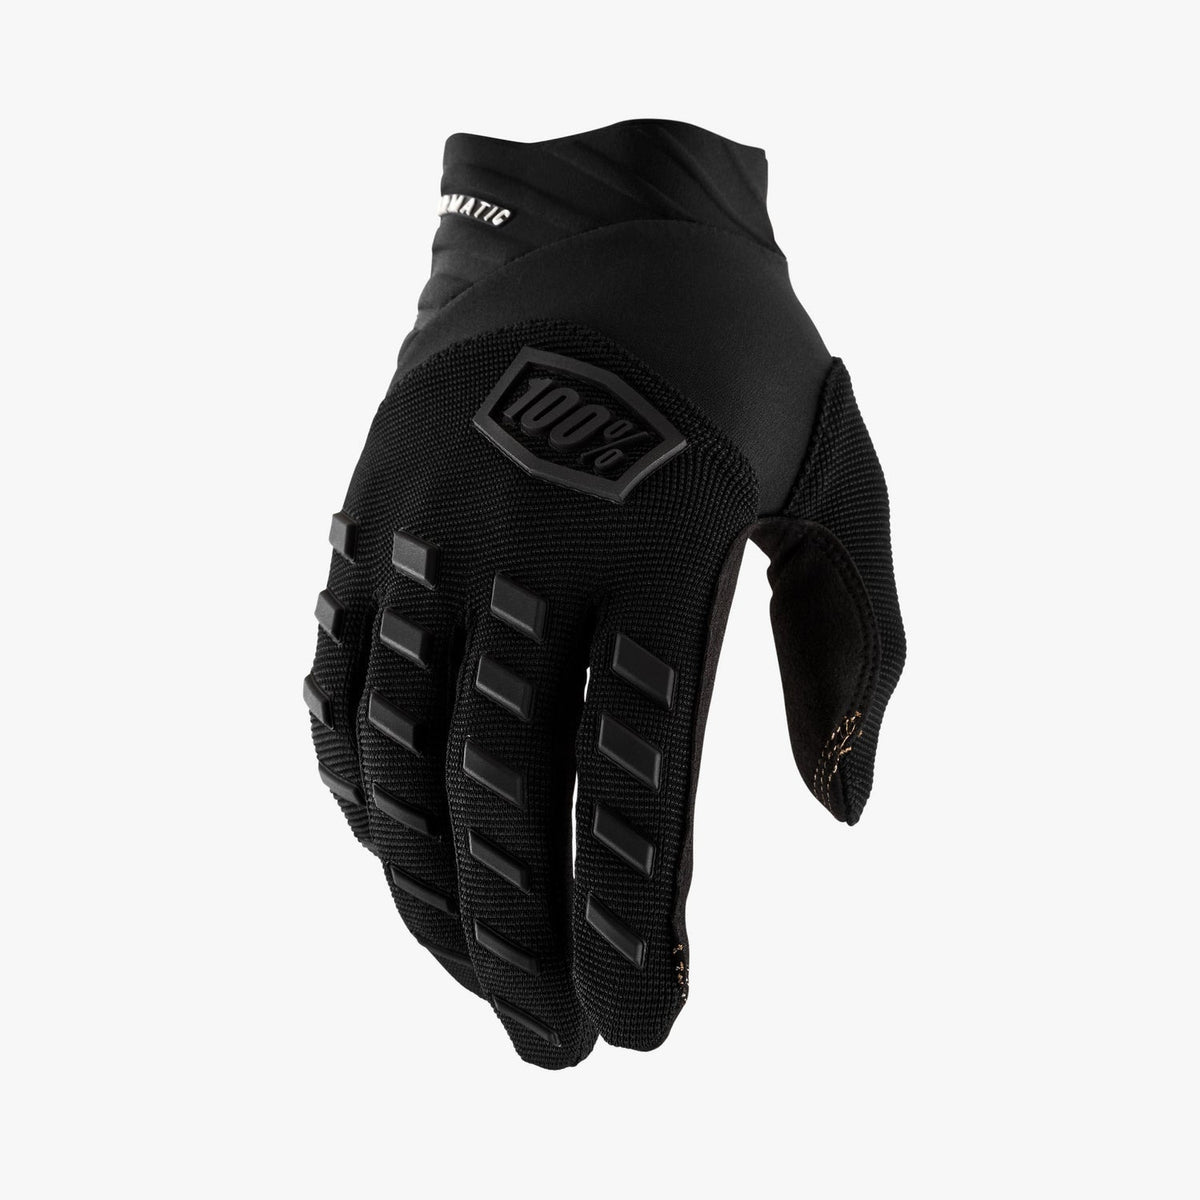 Airmatic Gloves (Black/Charcoal)